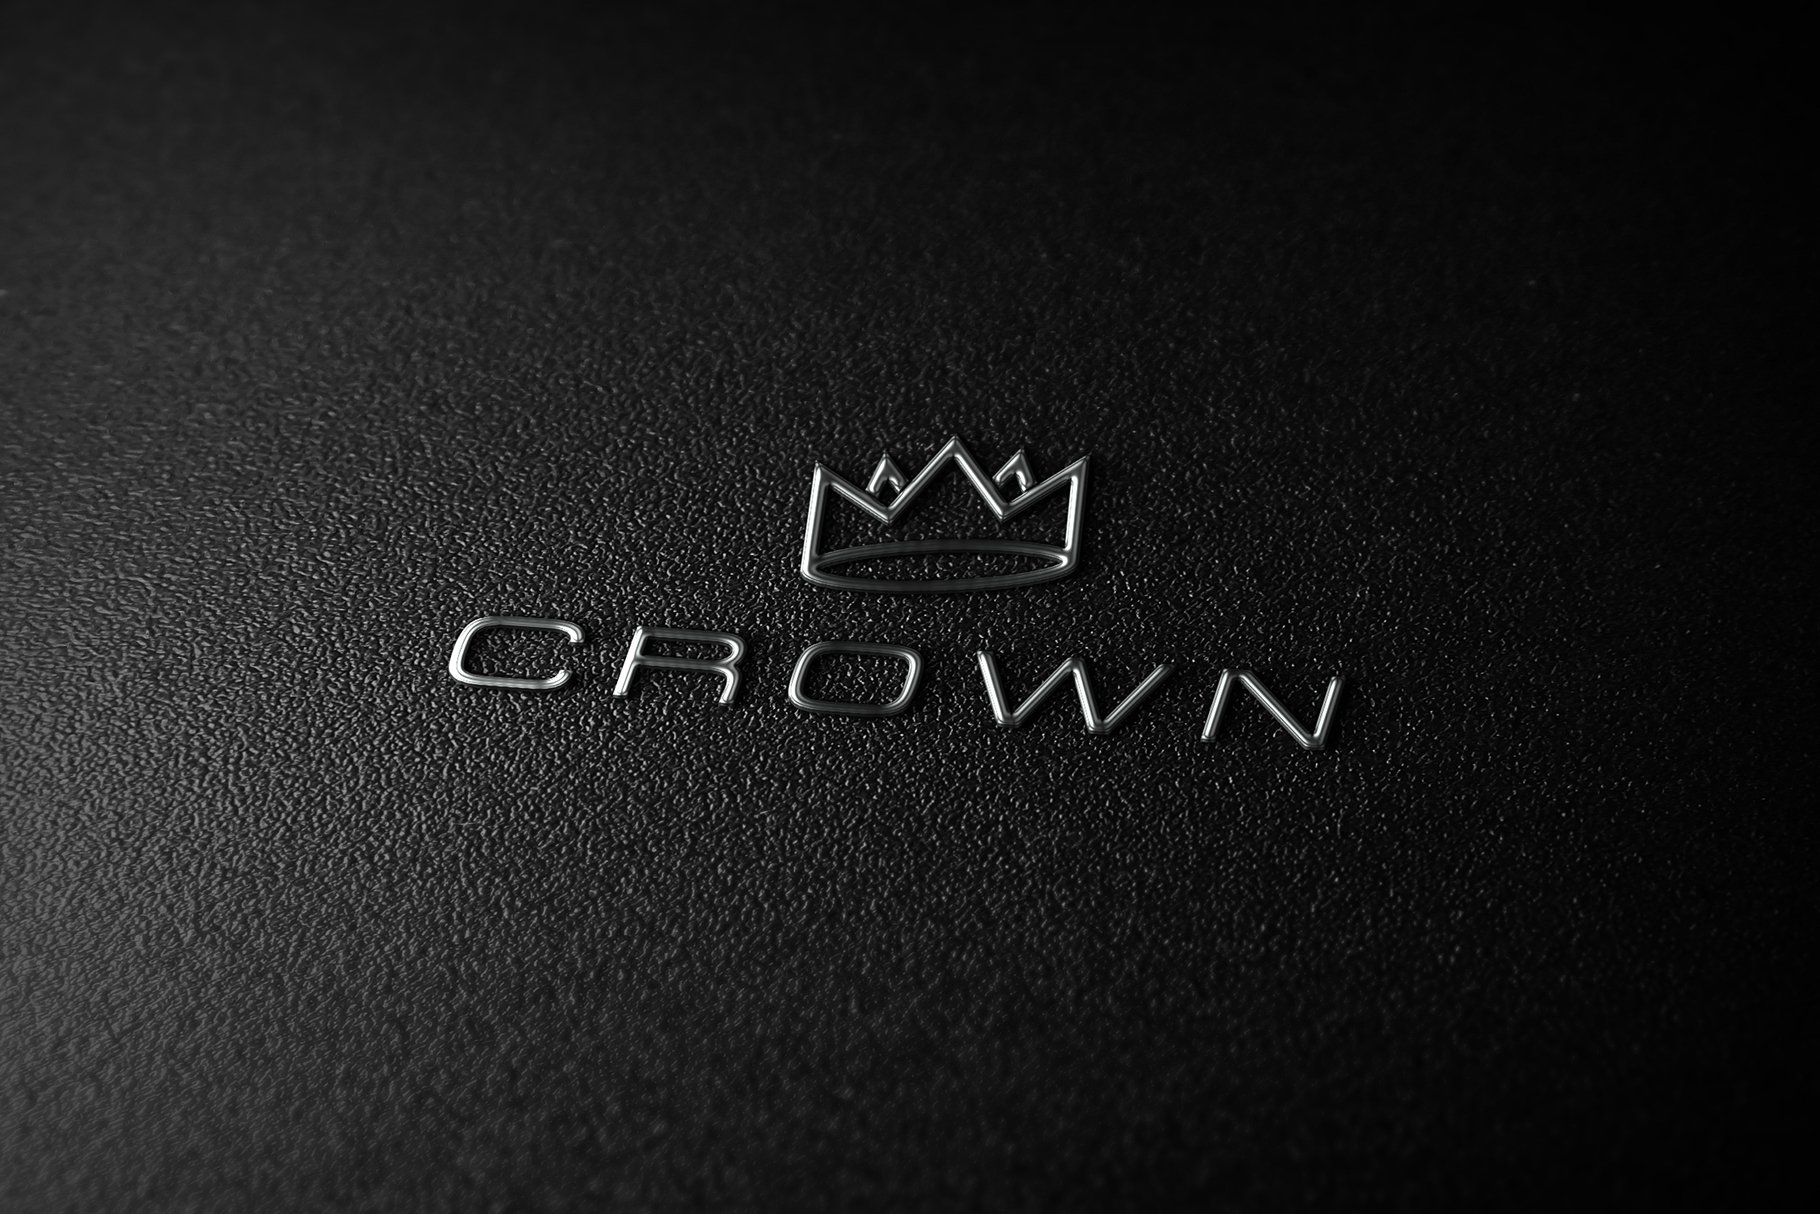 Matte black background with a gold crown logo.